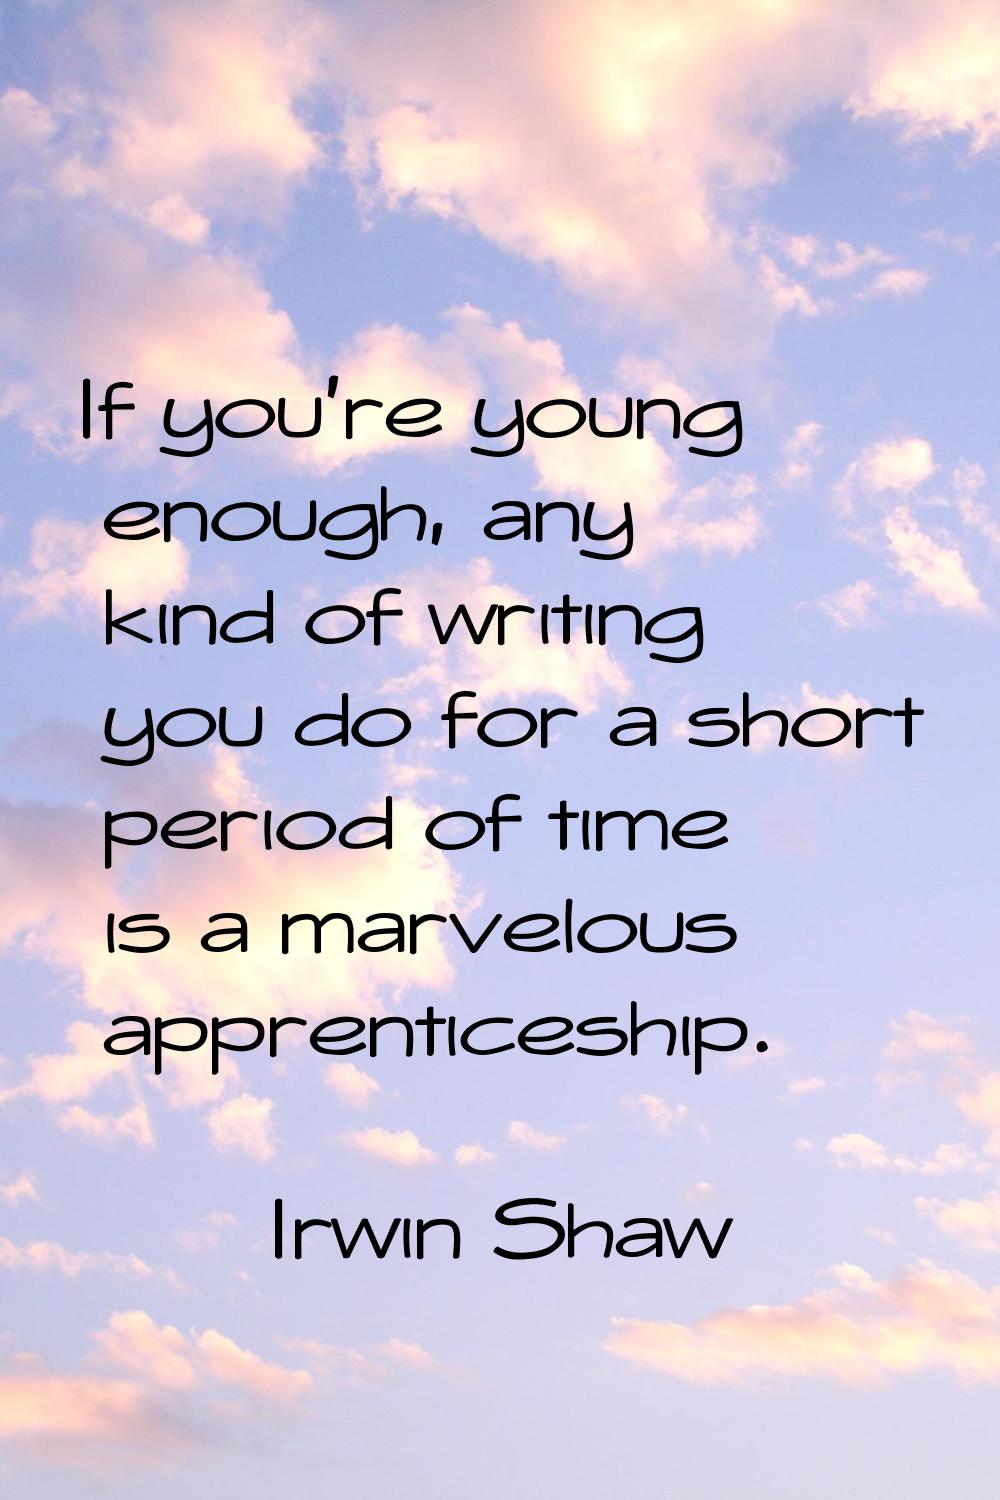 If you're young enough, any kind of writing you do for a short period of time is a marvelous appren